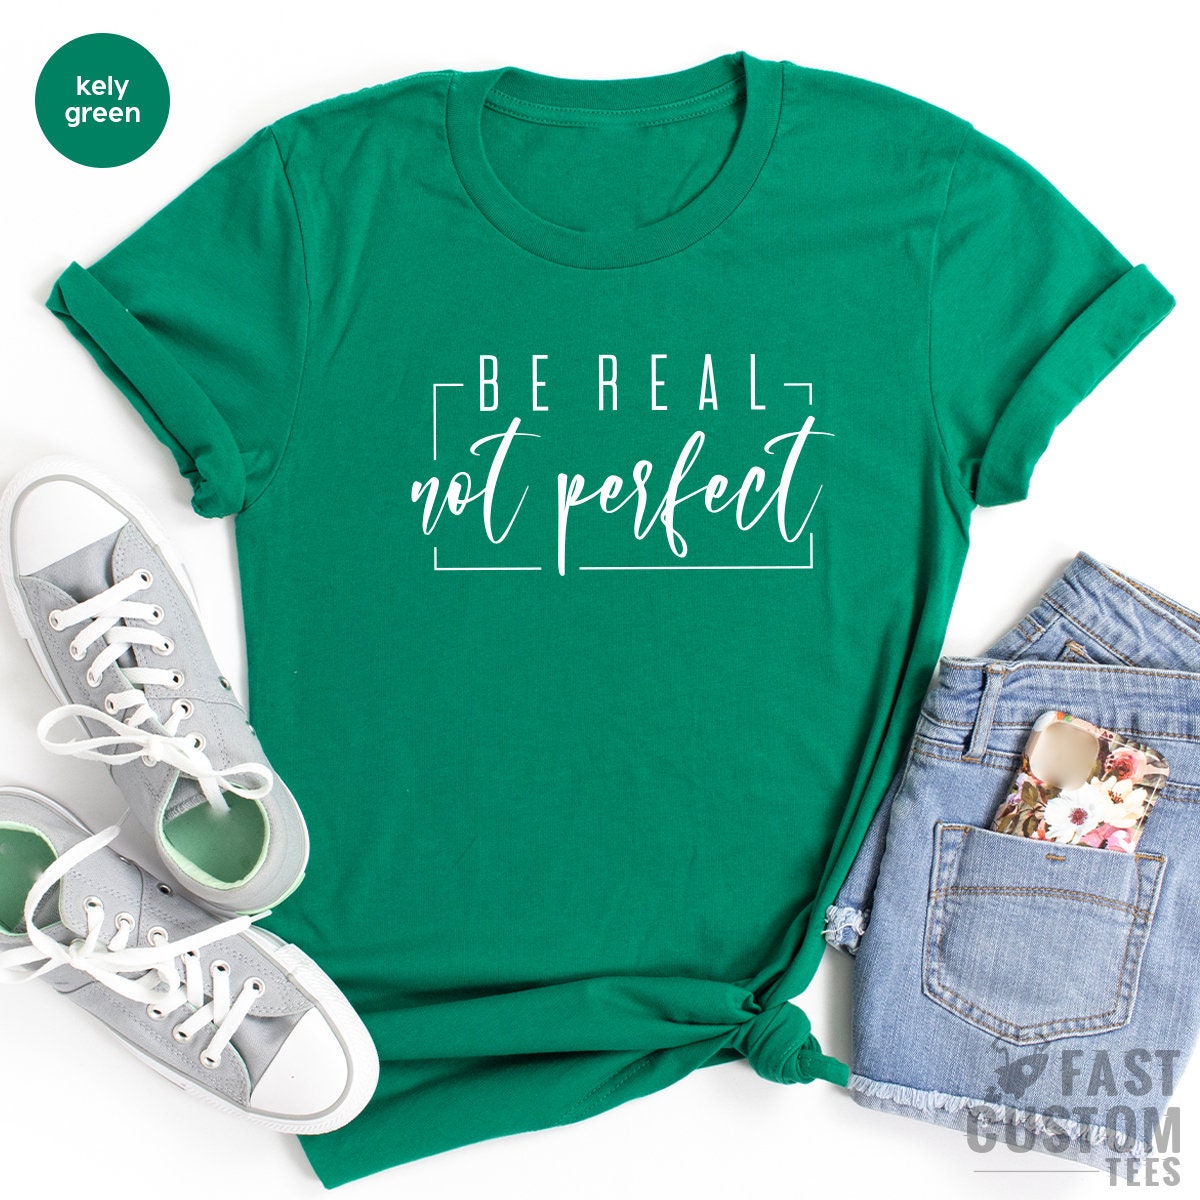 Be Real Not Perfect Shirt, Postive T Shirt, Love Your Life, Motivation TShirt, Inspirational Tee, Motivational Saying, Shirt With Saying - Fastdeliverytees.com